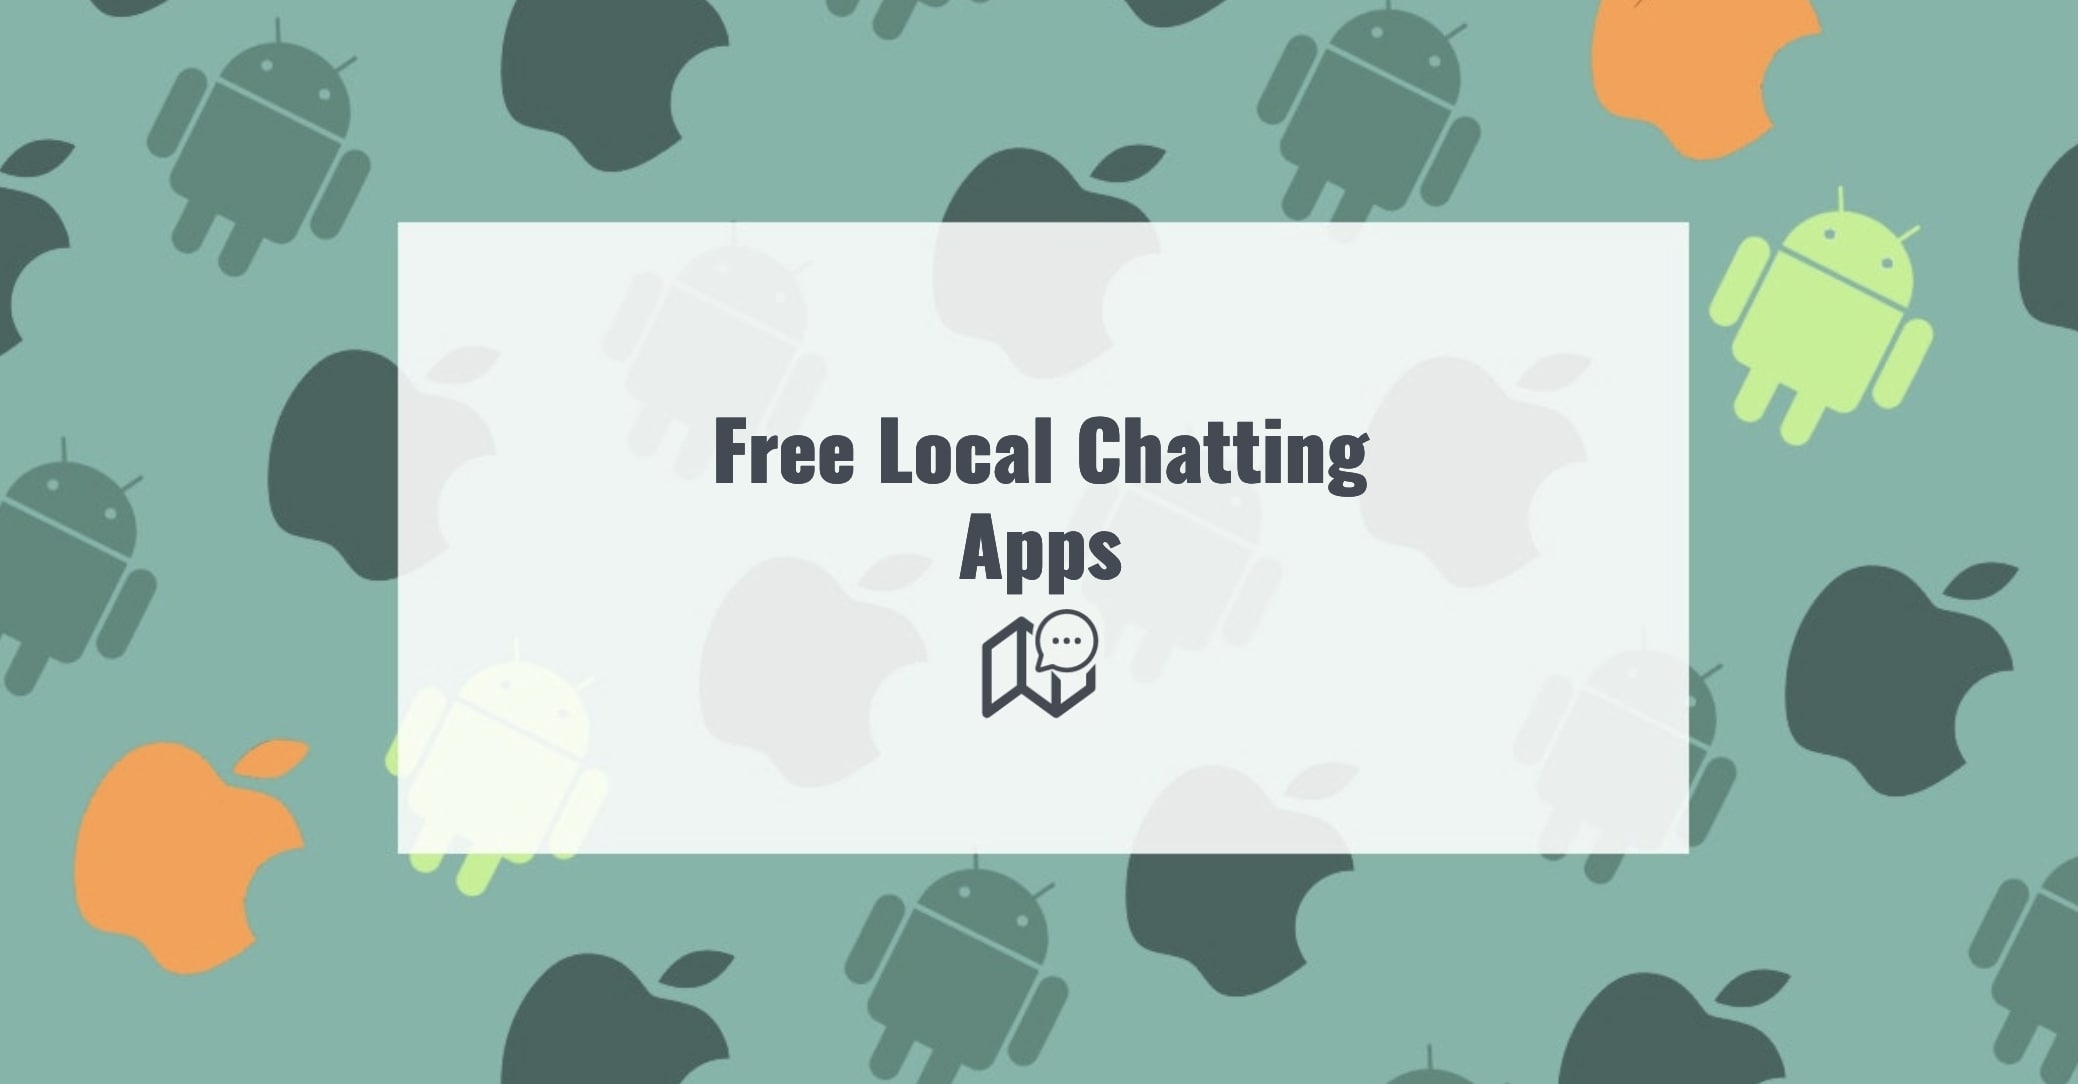 Free Local Chatting Apps